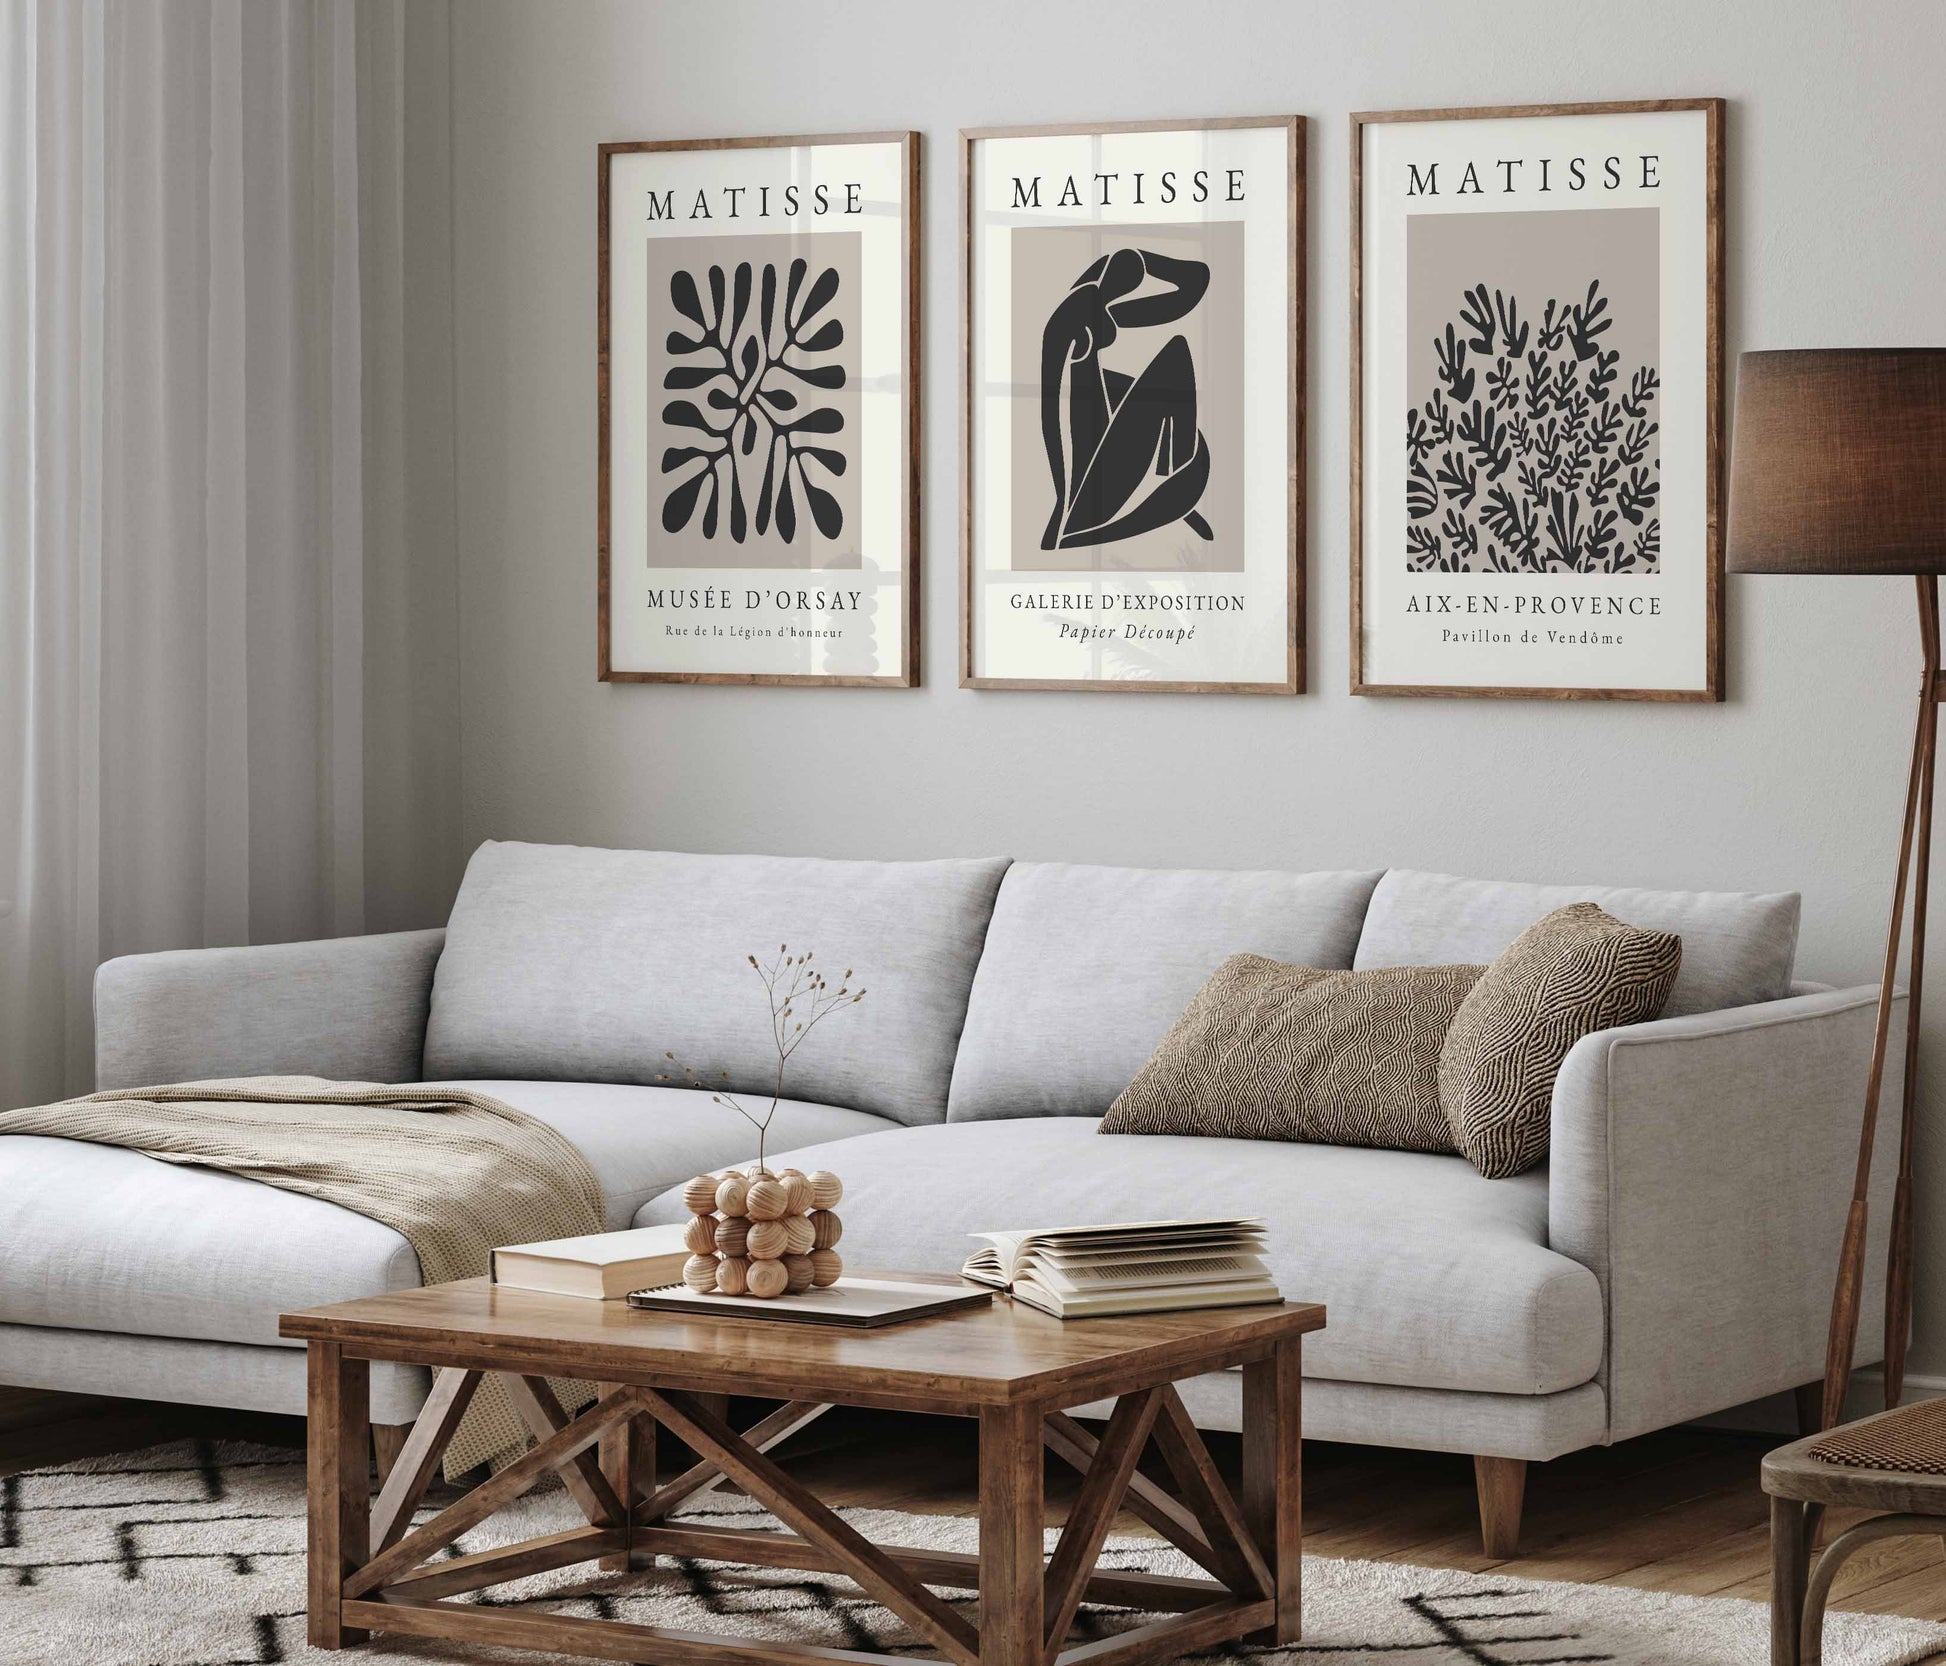 Set of Matisse posters in black and beige